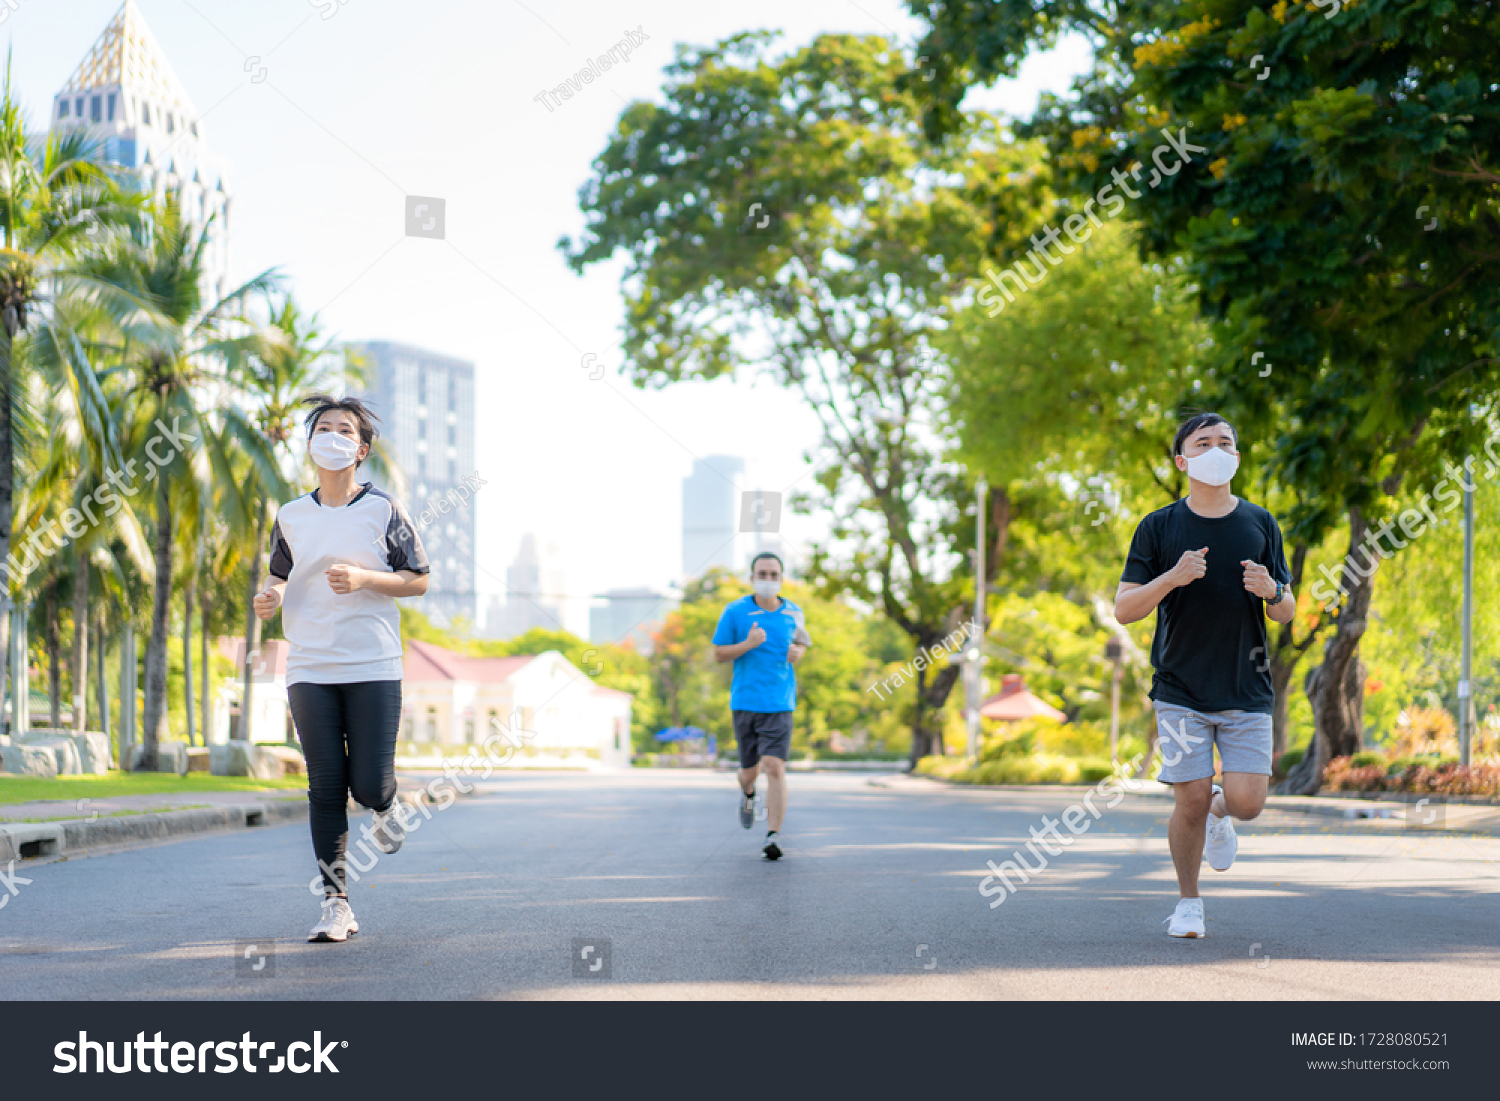 Asian young three woman and man are jogging and exciseing outdoor in city park and wearing protective mask on face for stay in fit during Covid-19 pandemic in Bangkok, Thailand.
 #1728080521